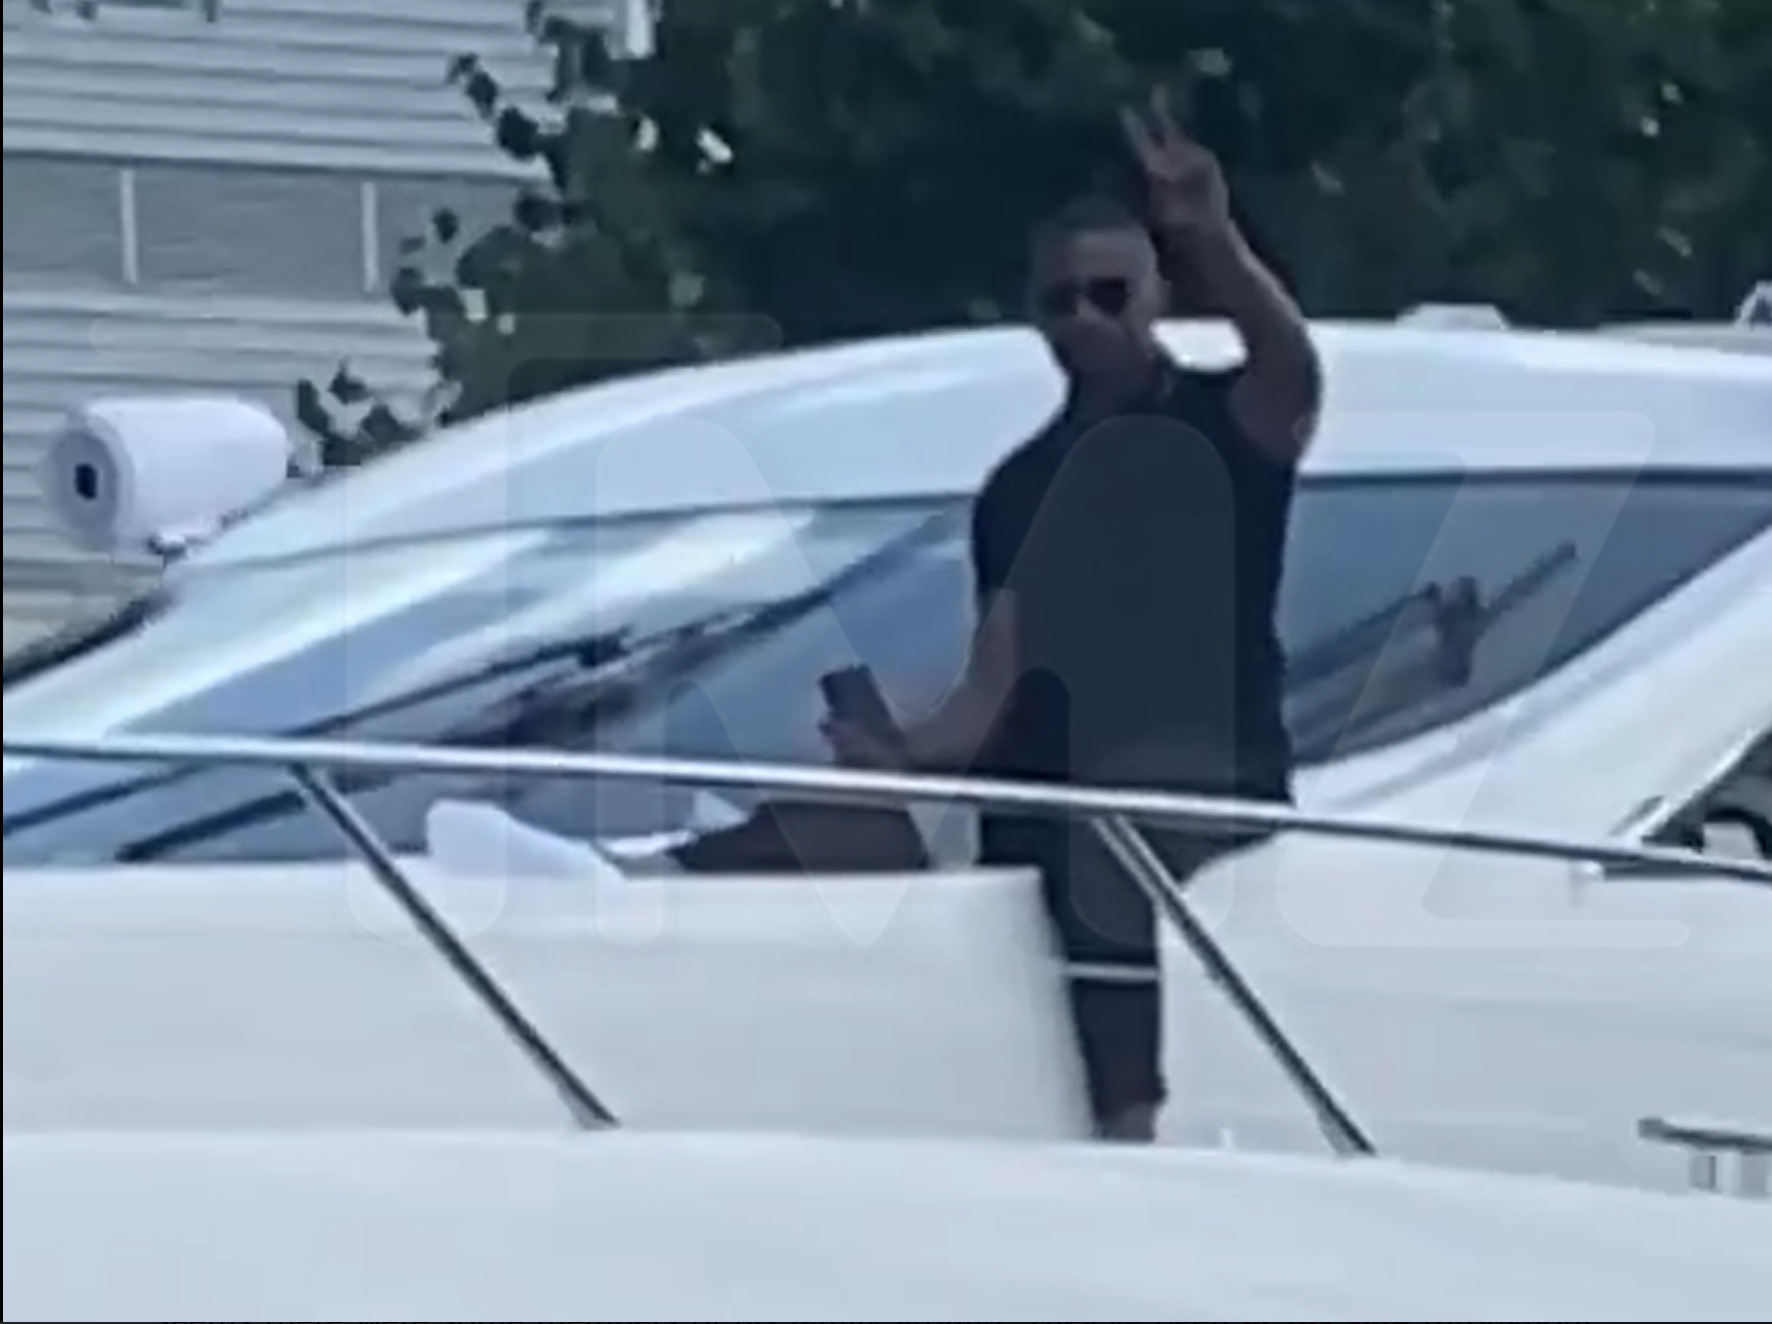 Jamie Foxx Waves to Fans on Boat, First Sighting Since Hospitalization